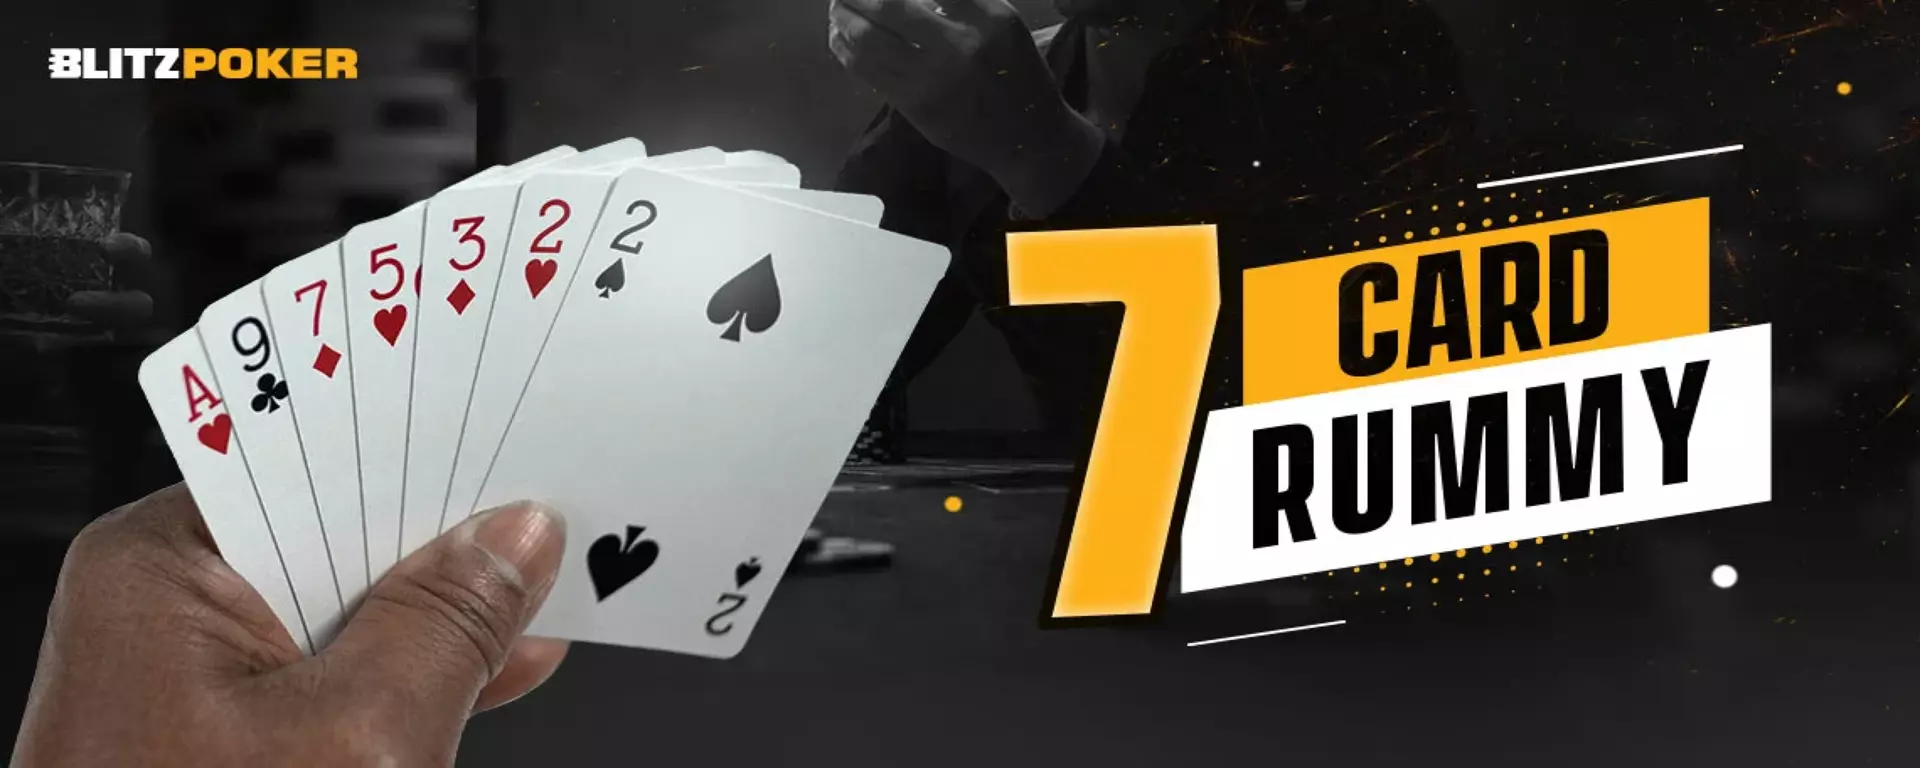 7 Card Rummy: Rules, How To Play, Scoring, Strategies & More